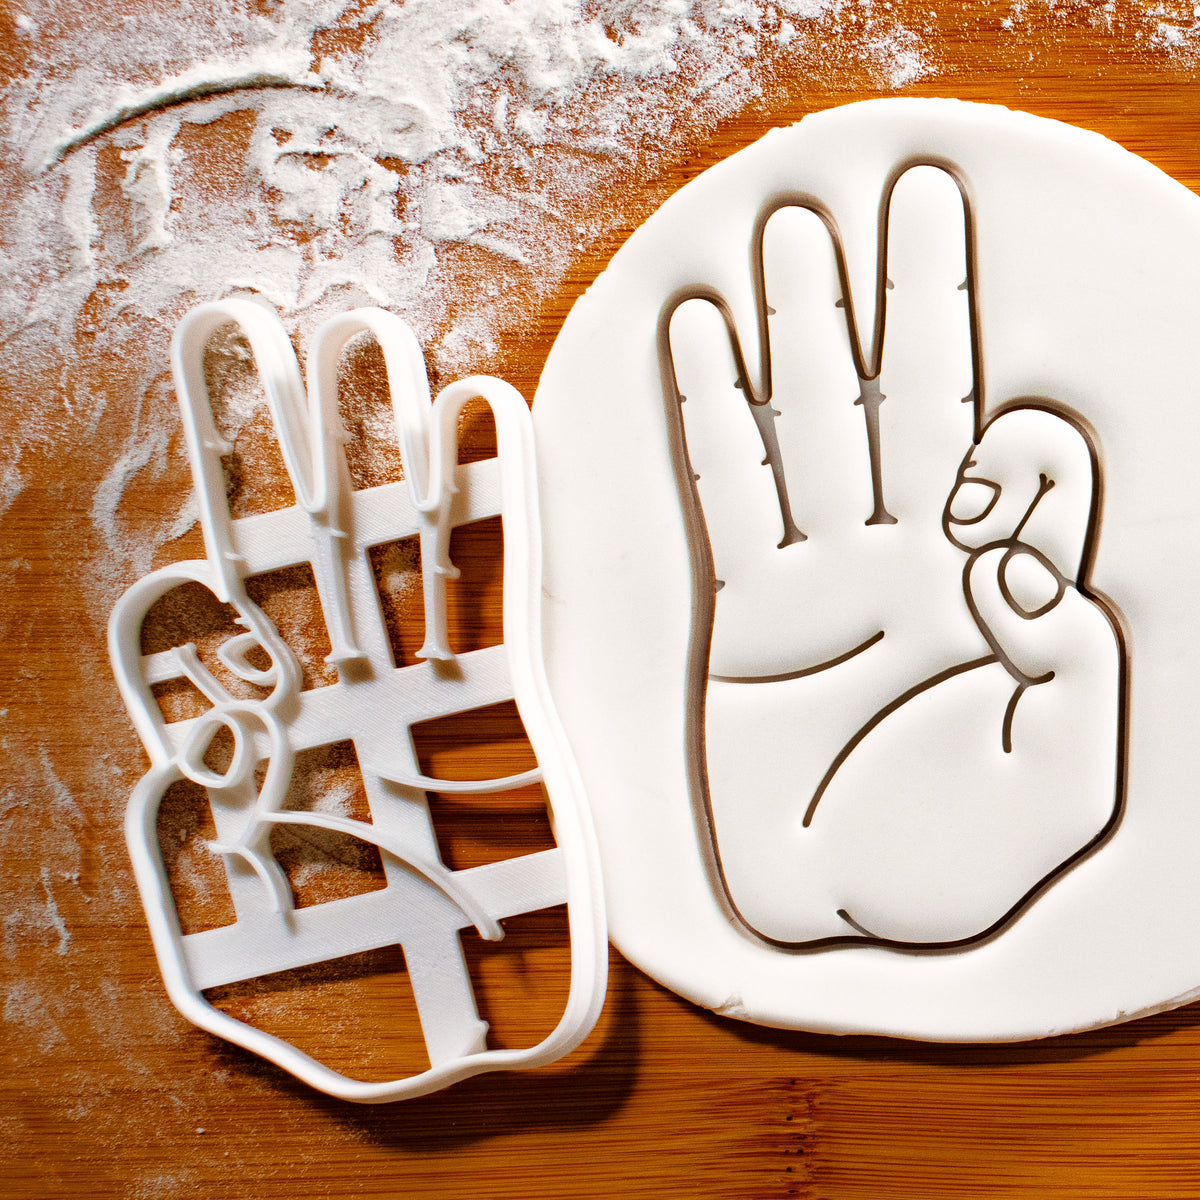 American Sign Language Letter F Cookie Cutter